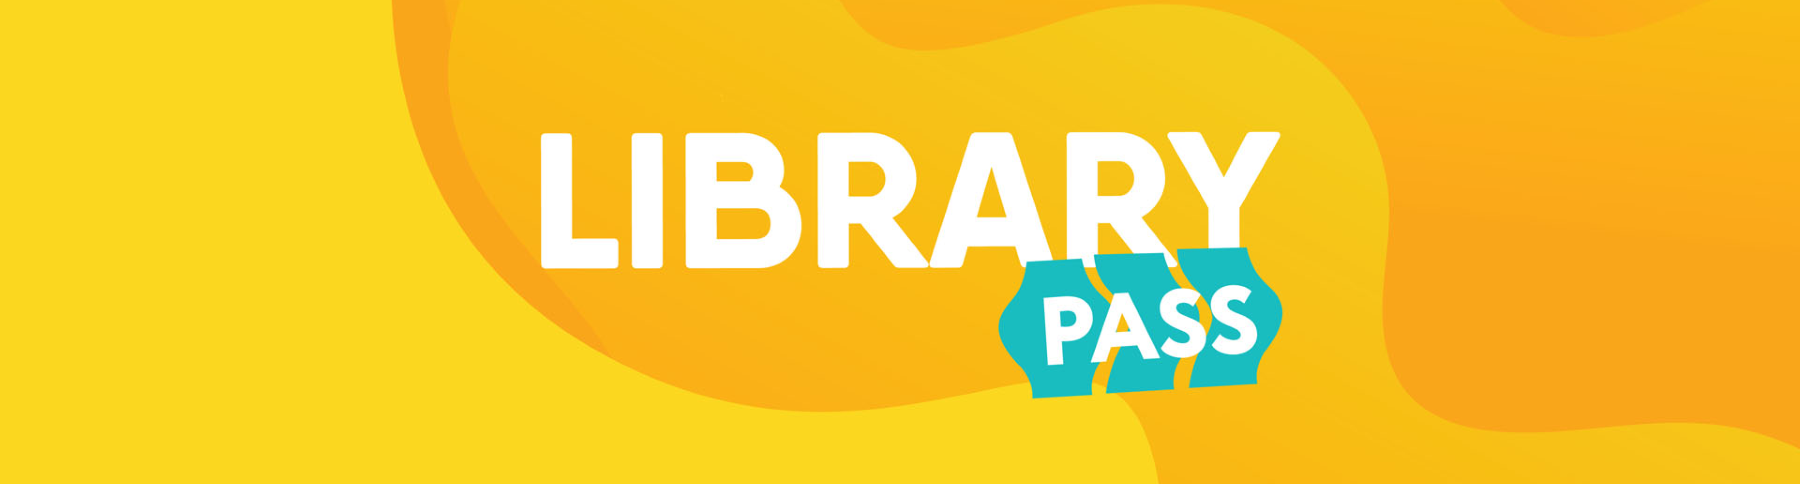 librarypass_banner (1).png